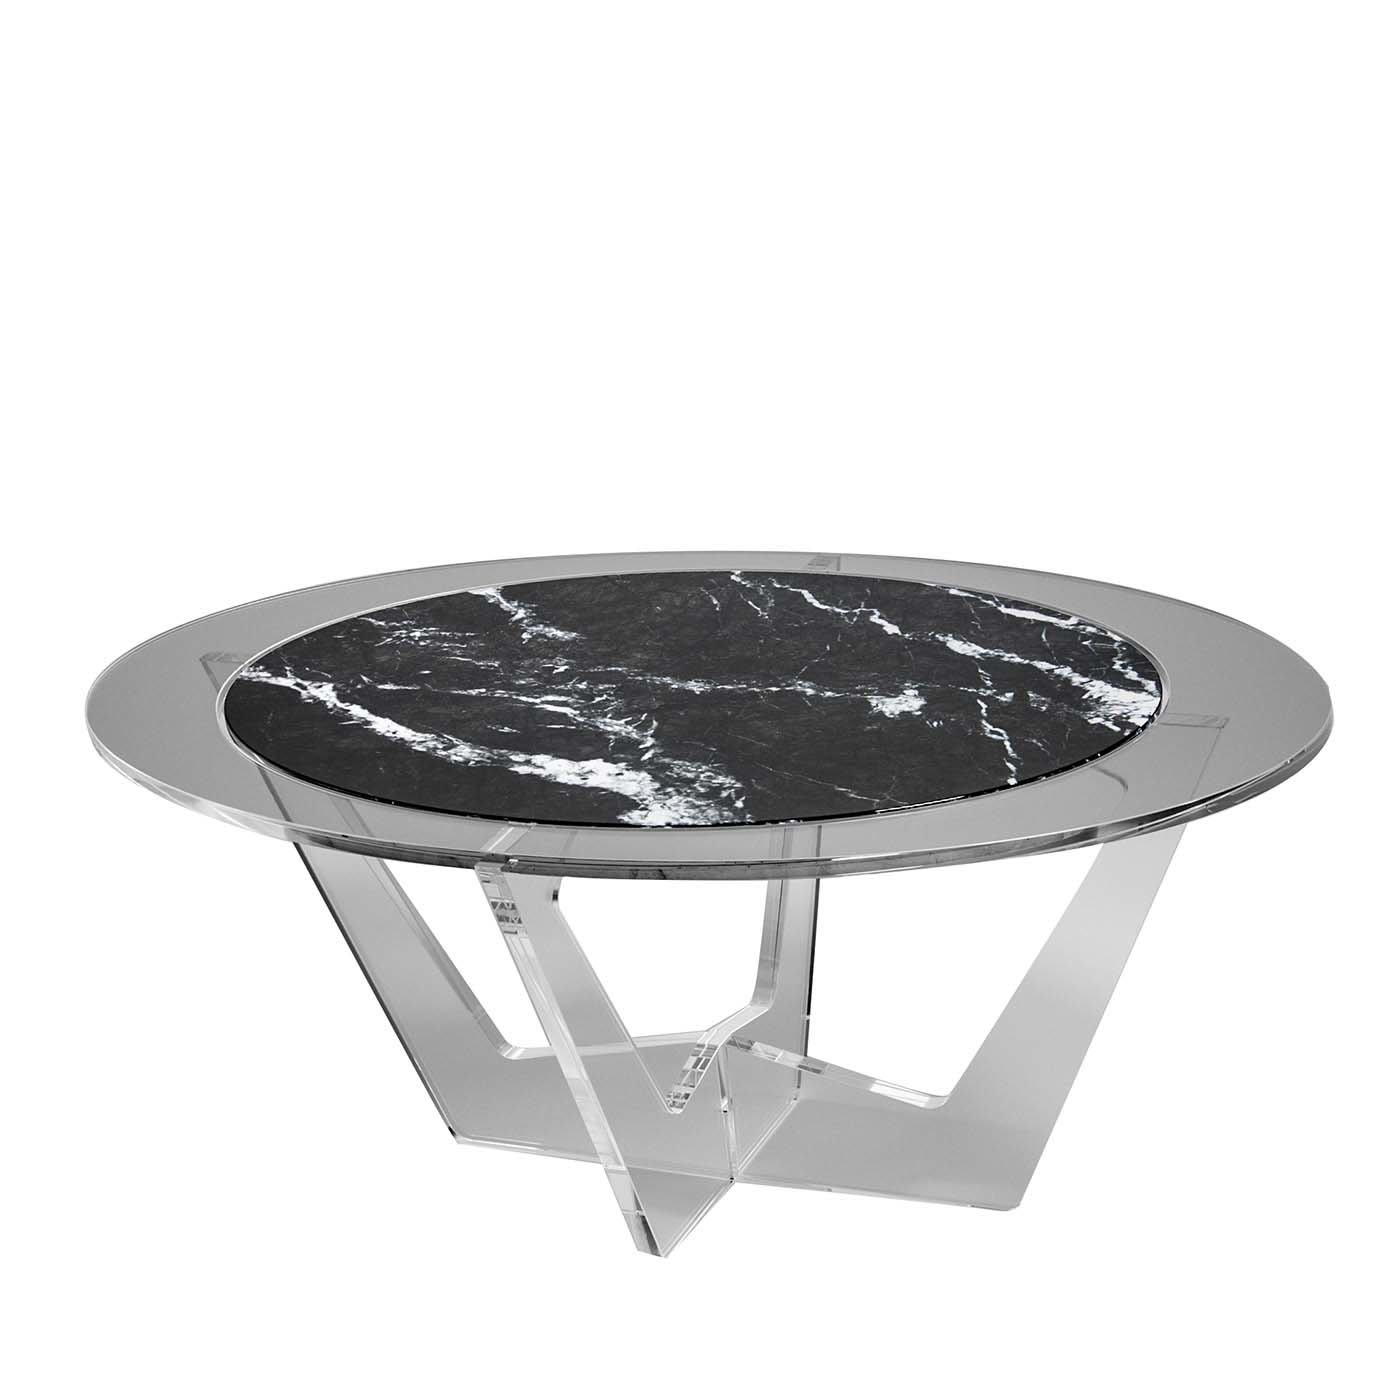 Hac Gray Oval Coffee Table with Carnico Marble Top - Madea Milano